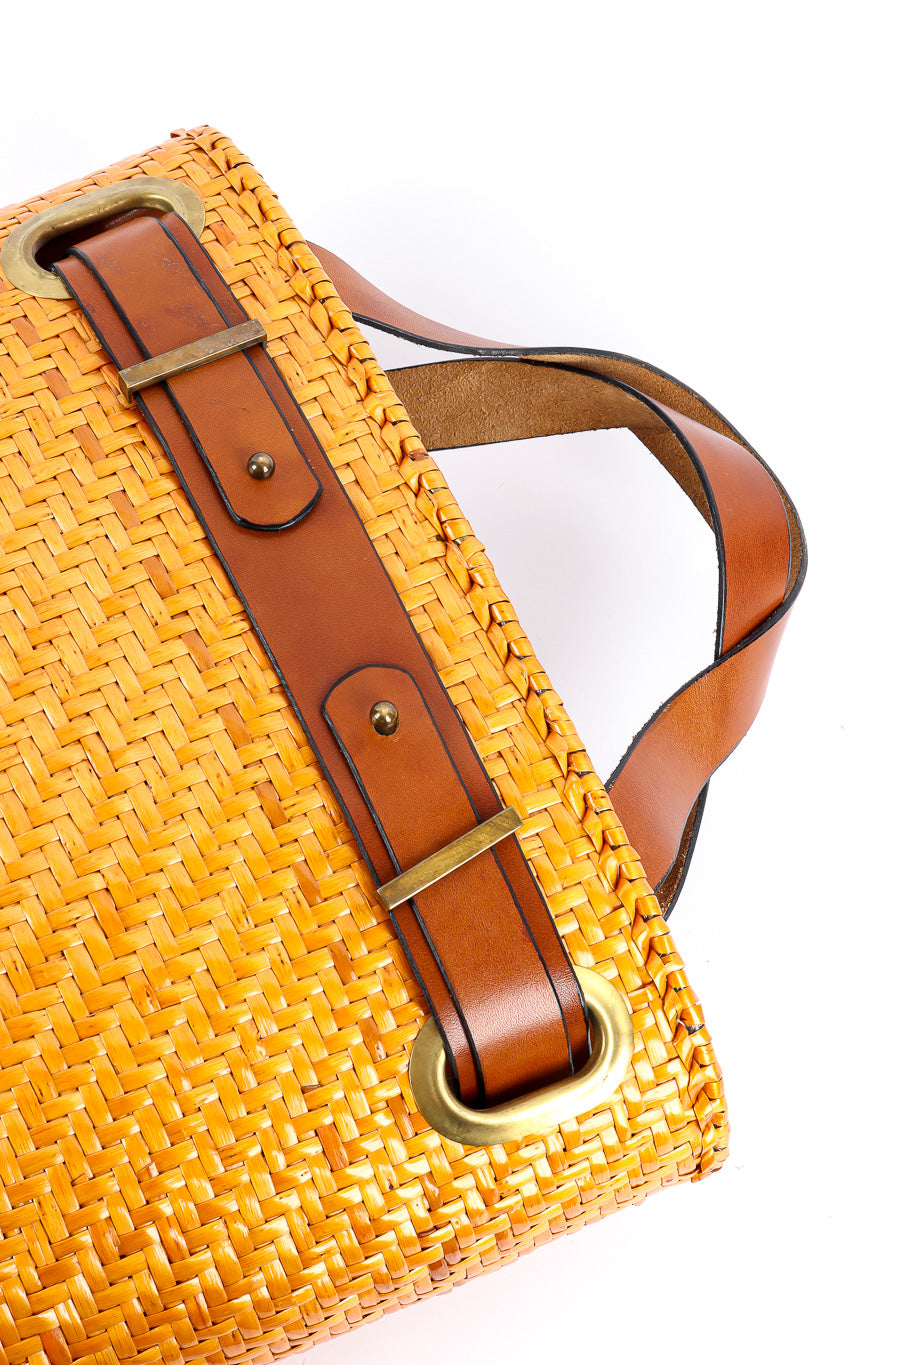 Vintage Rodo Wicker and leather tote bag handle details @recessla